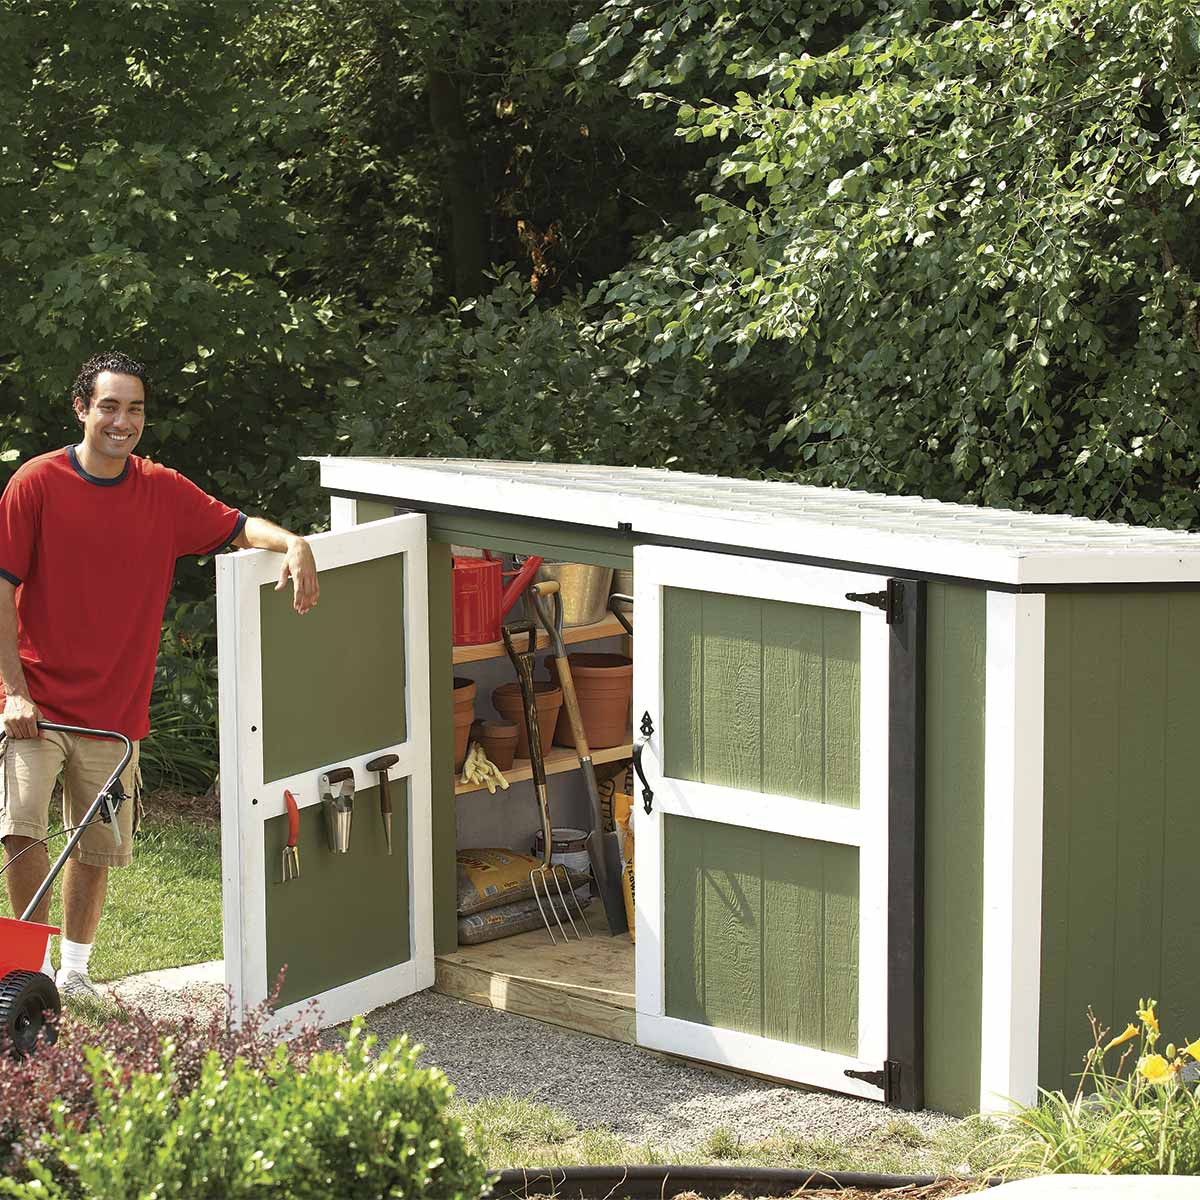 DIY Tractor Shed Plans
 Outdoor Storage Locker Plans & Materials